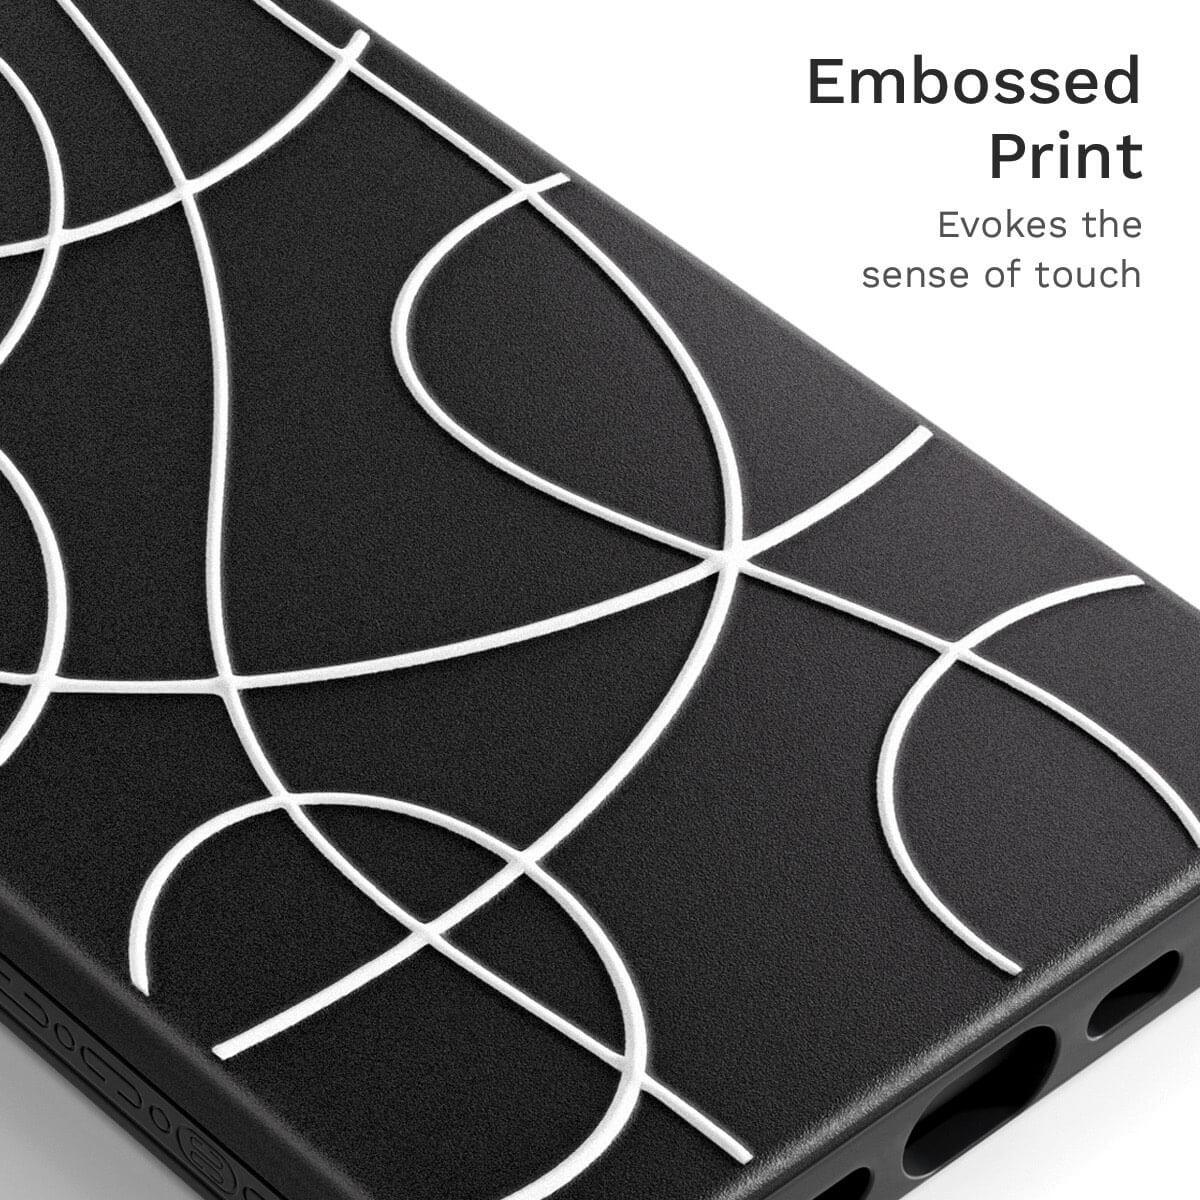 iPhone 14 Pro Seeing Squiggles Phone Case - CORECOLOUR